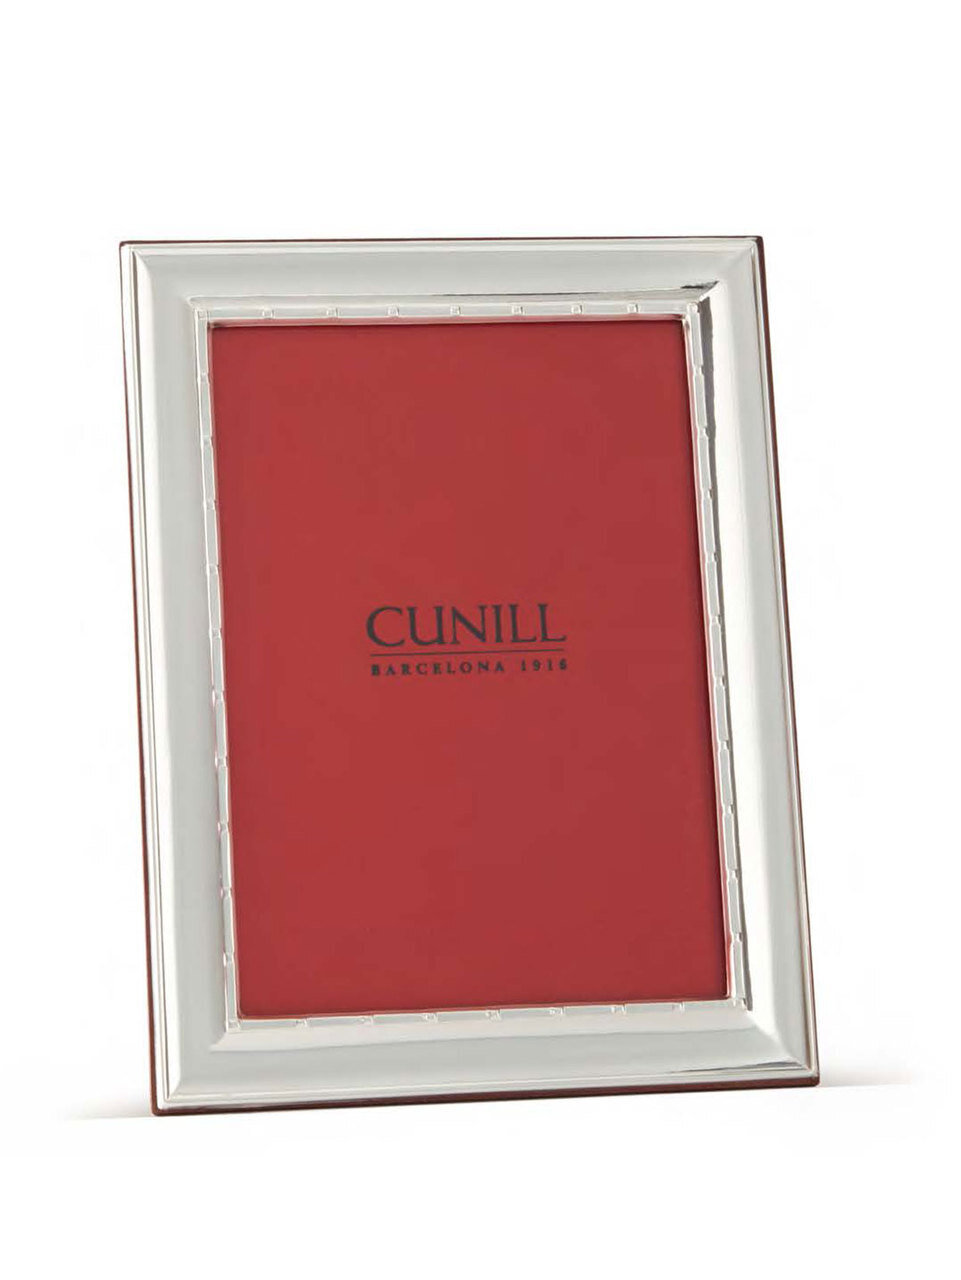 Cunill 5000 8 x 10 Inch Picture Frame - Sterling Silver